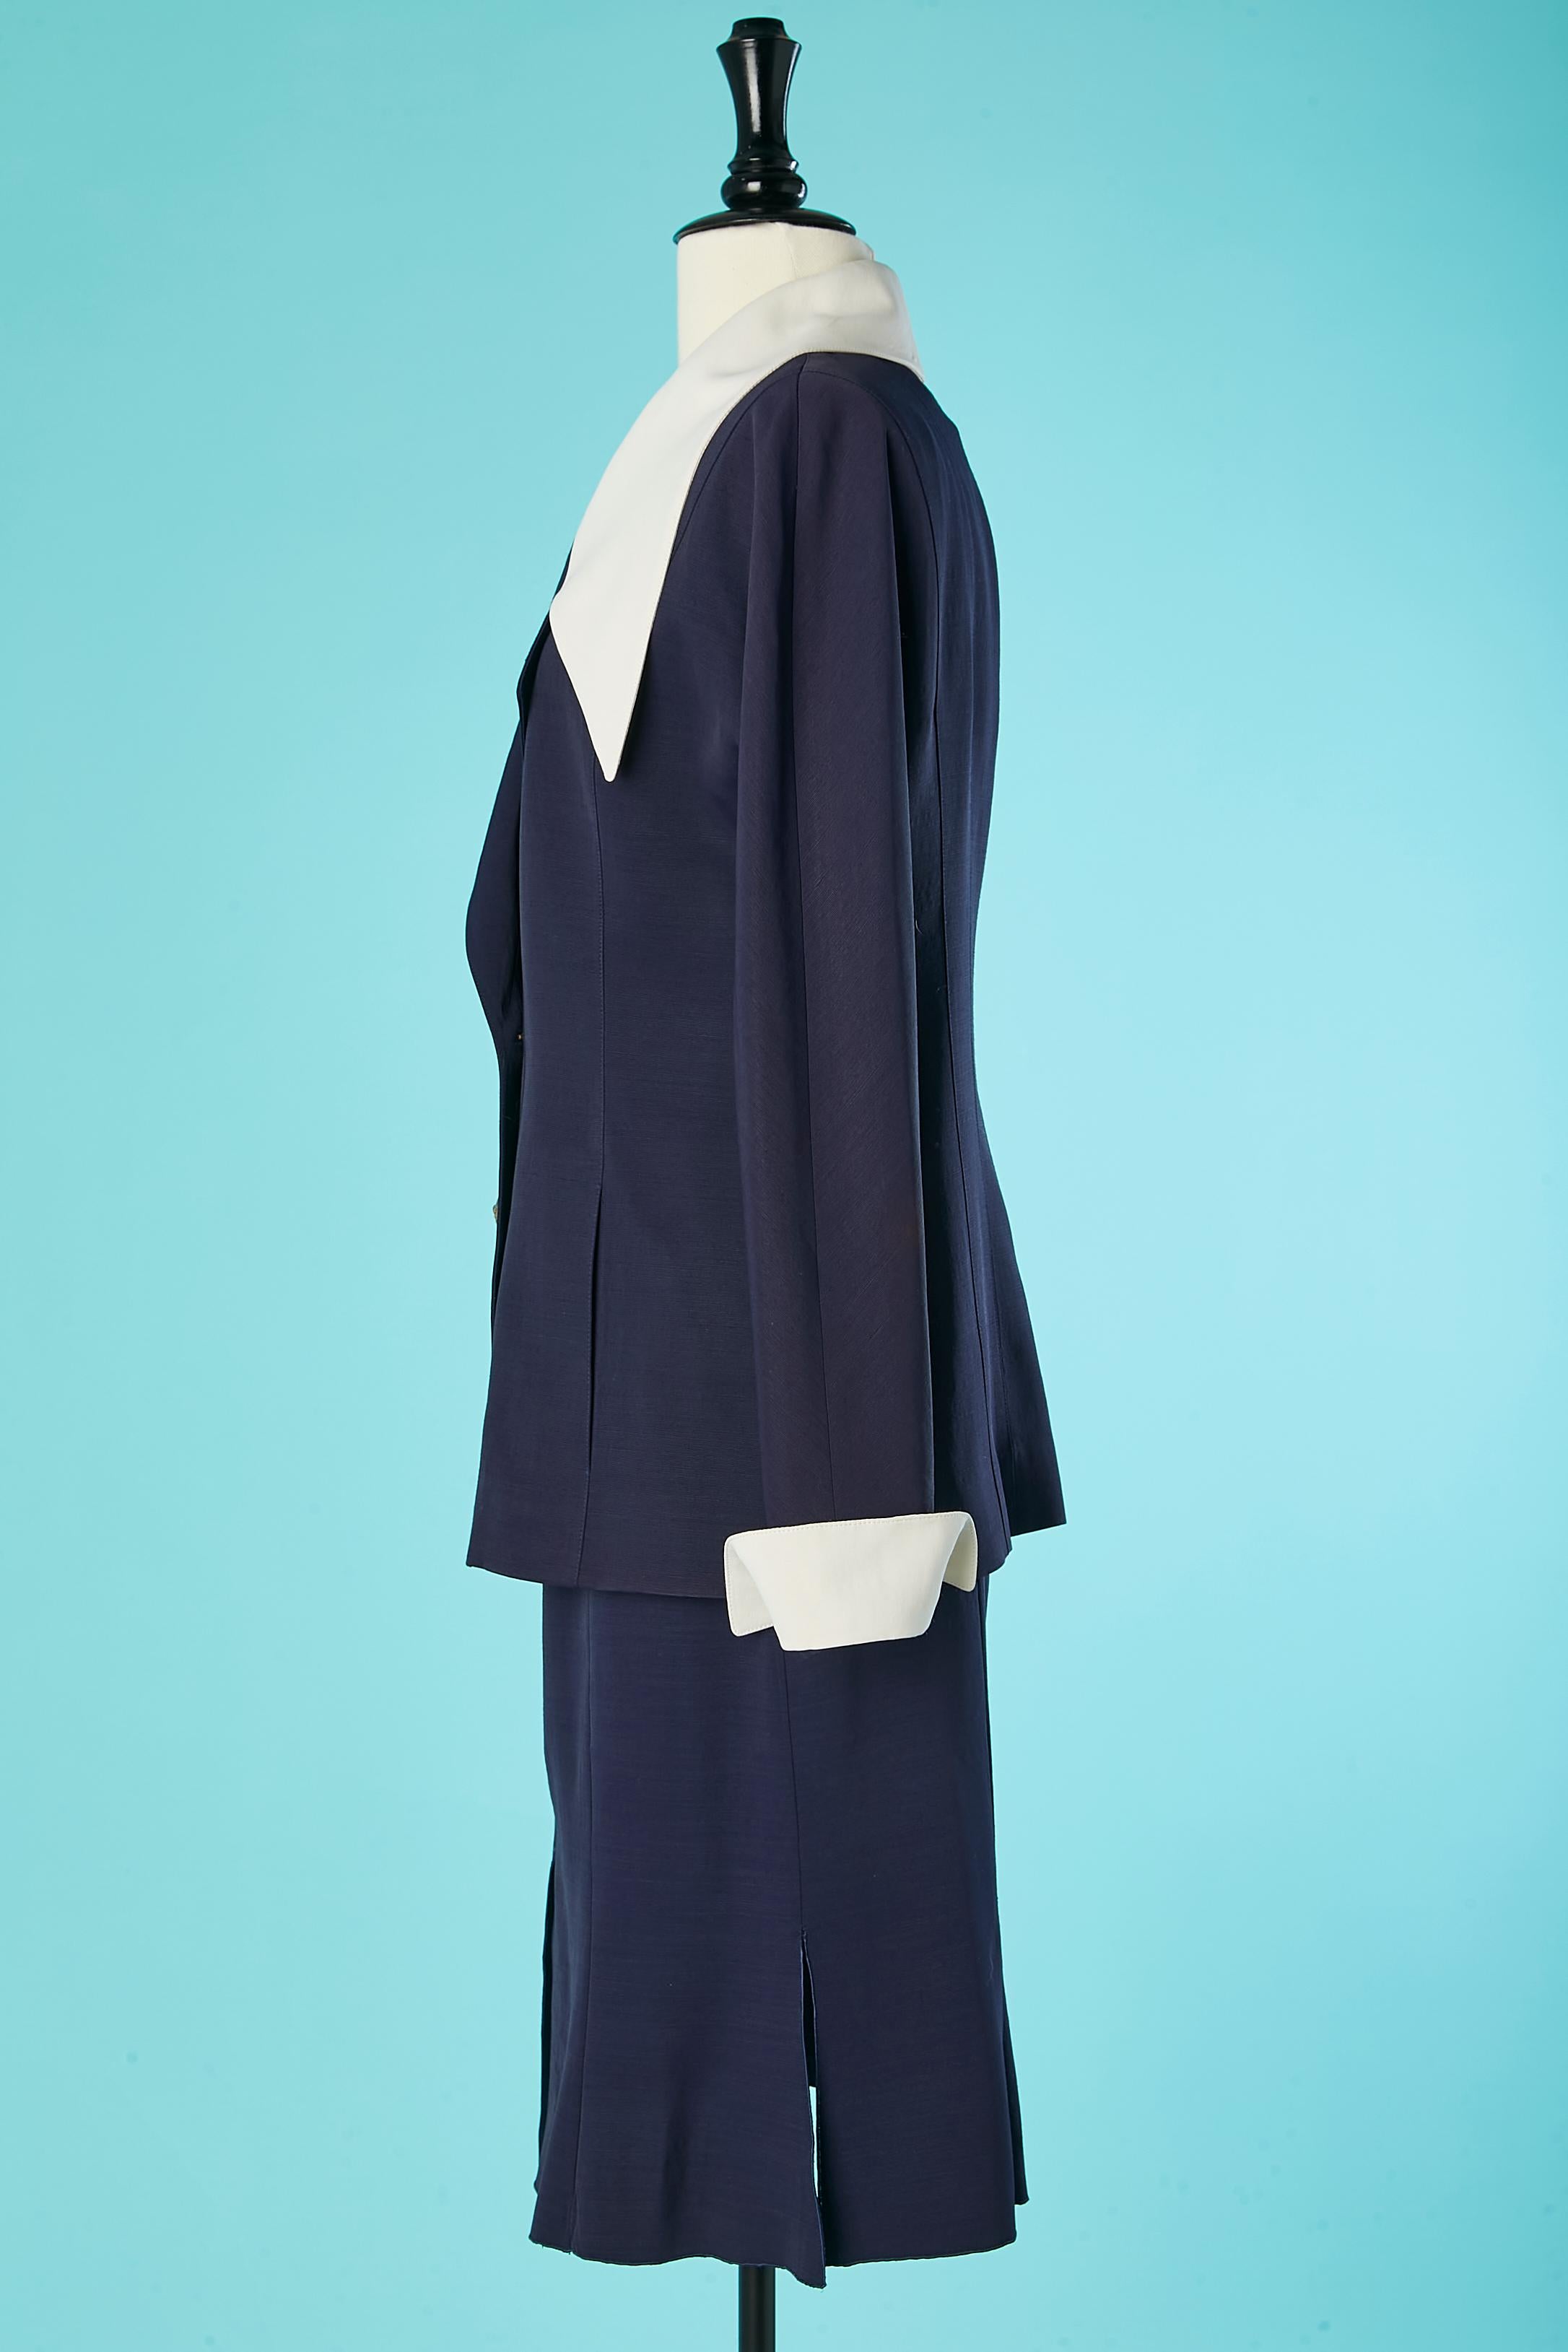 Navy blue skirt suit with white details Karl Lagerfeld for Bergdorf Goodman  In Good Condition For Sale In Saint-Ouen-Sur-Seine, FR